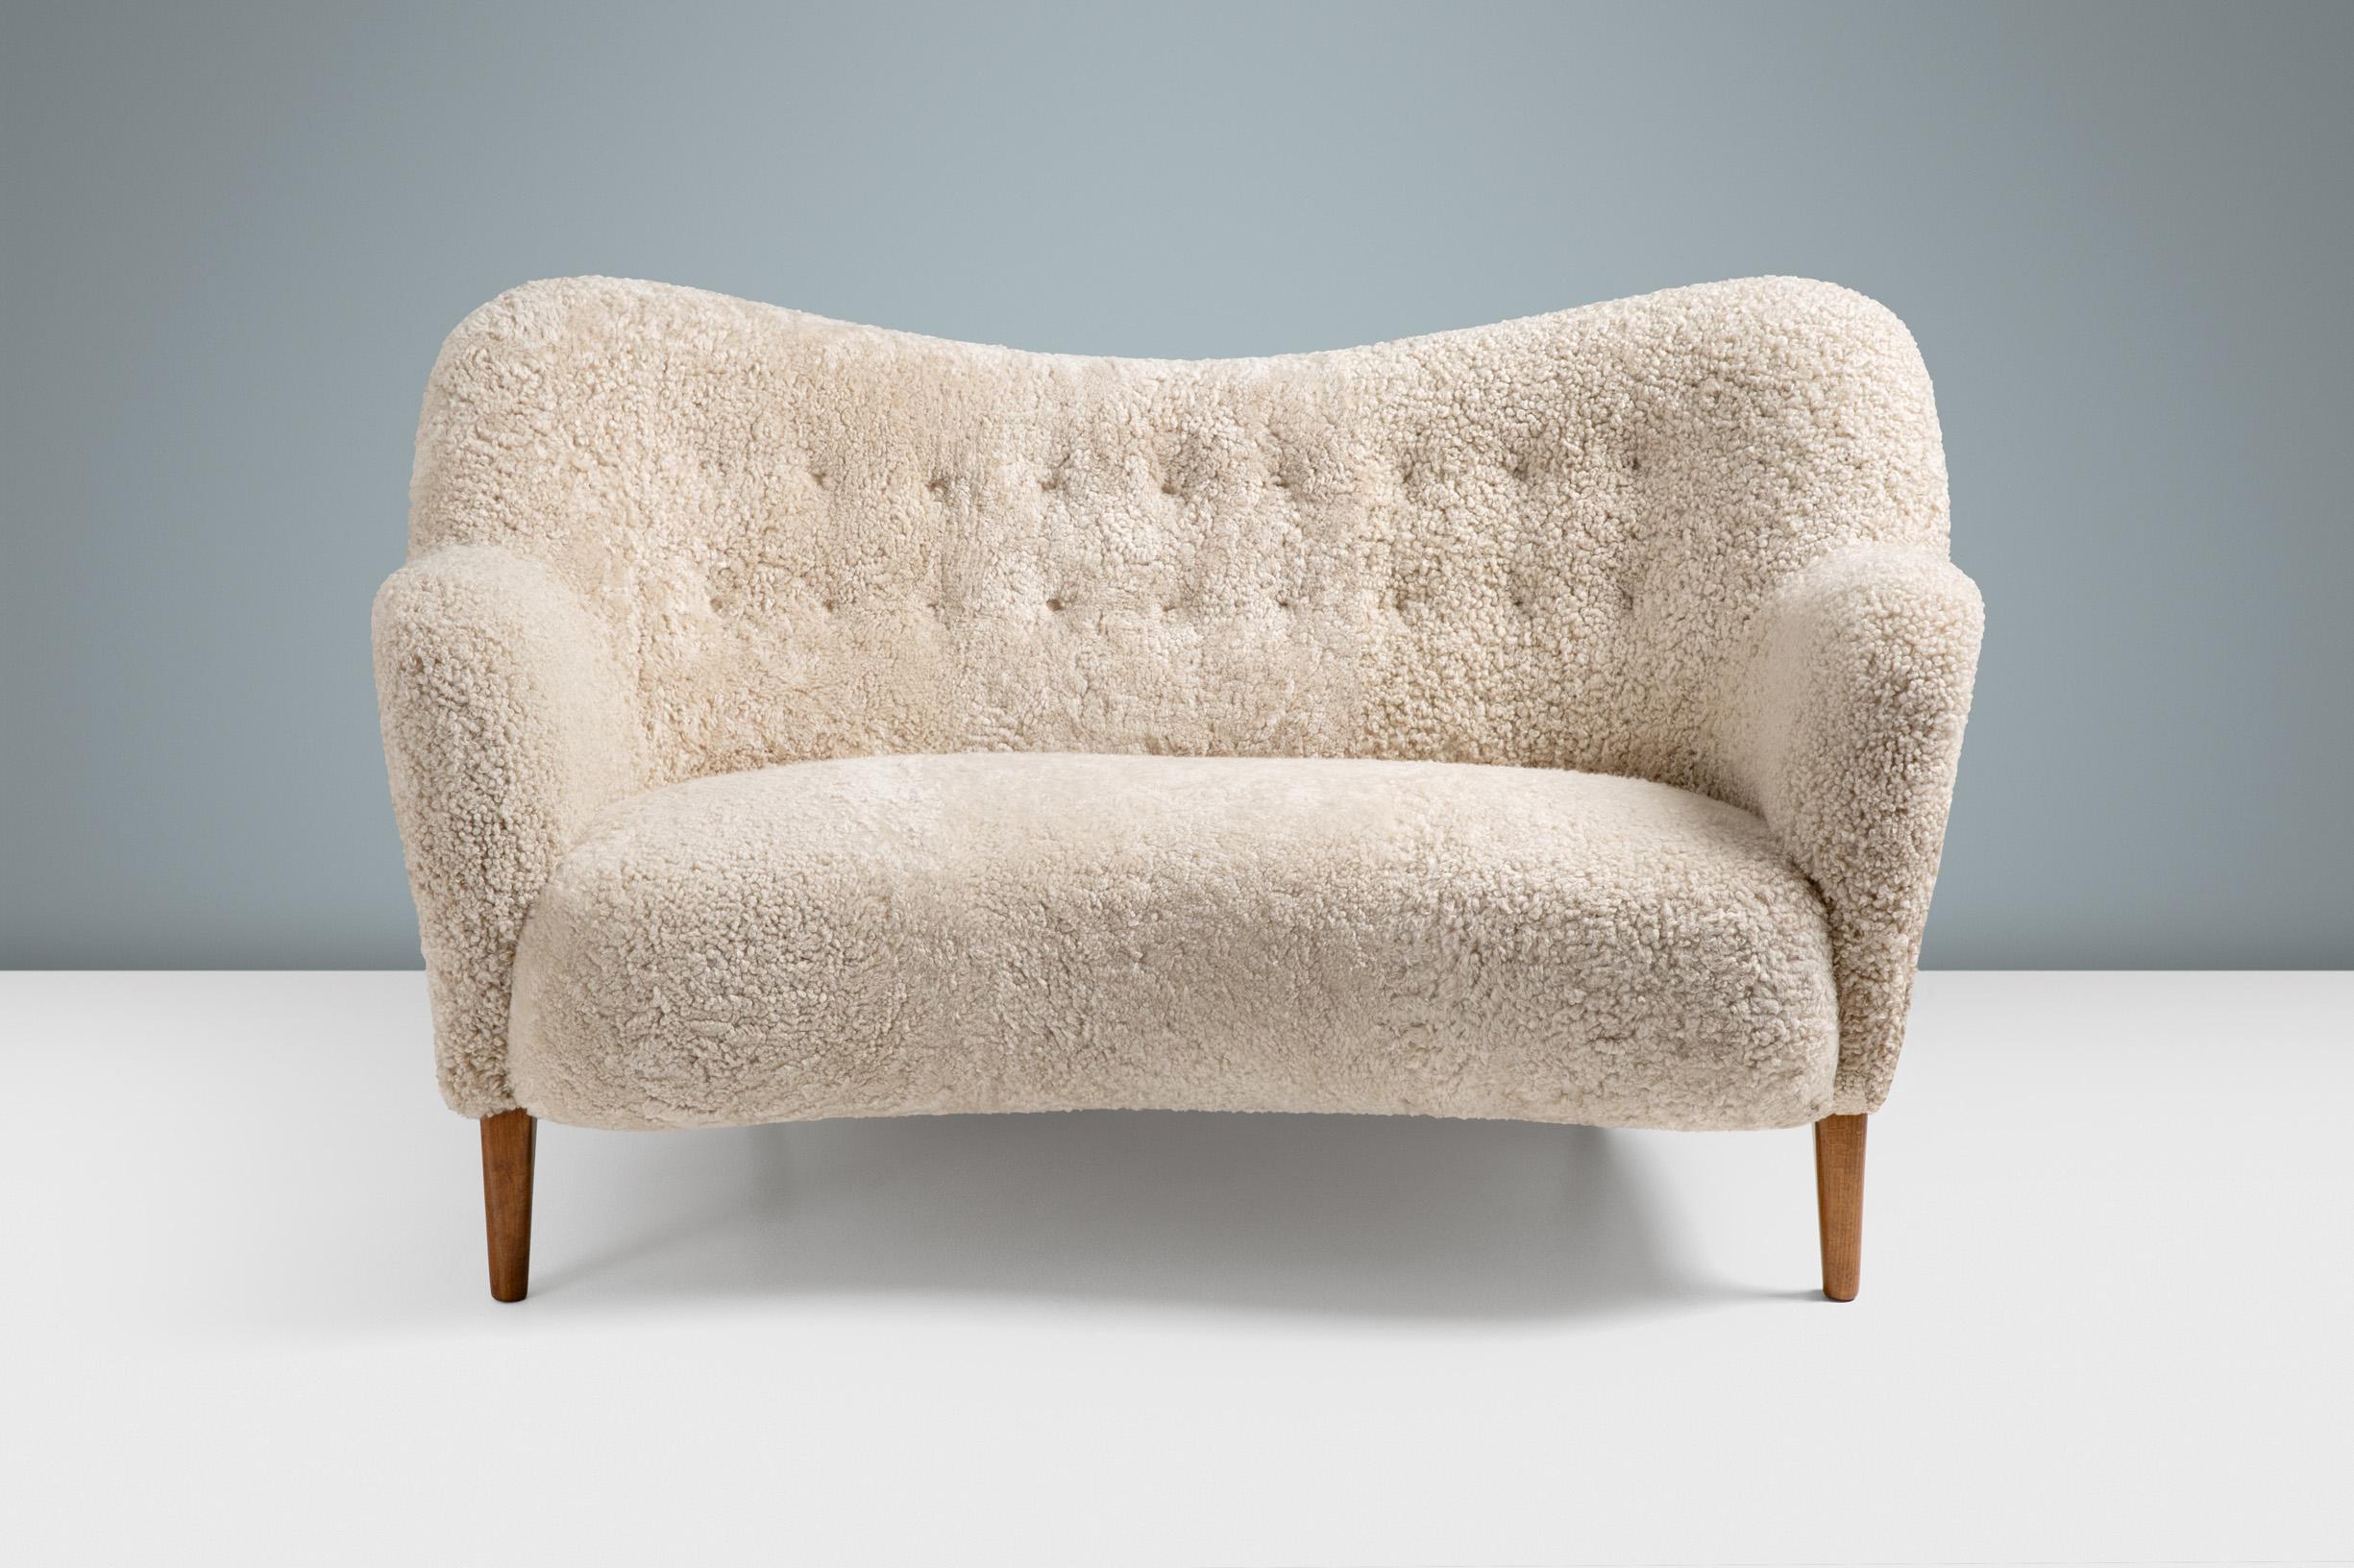 A custom-made new edition of this classic love-seat sofa by Danish designer and cabinetmaker: Alfred Kristensen. This re-edition is produced under license in Sweden by Dagmar and available to order in a range of upholstery and wood